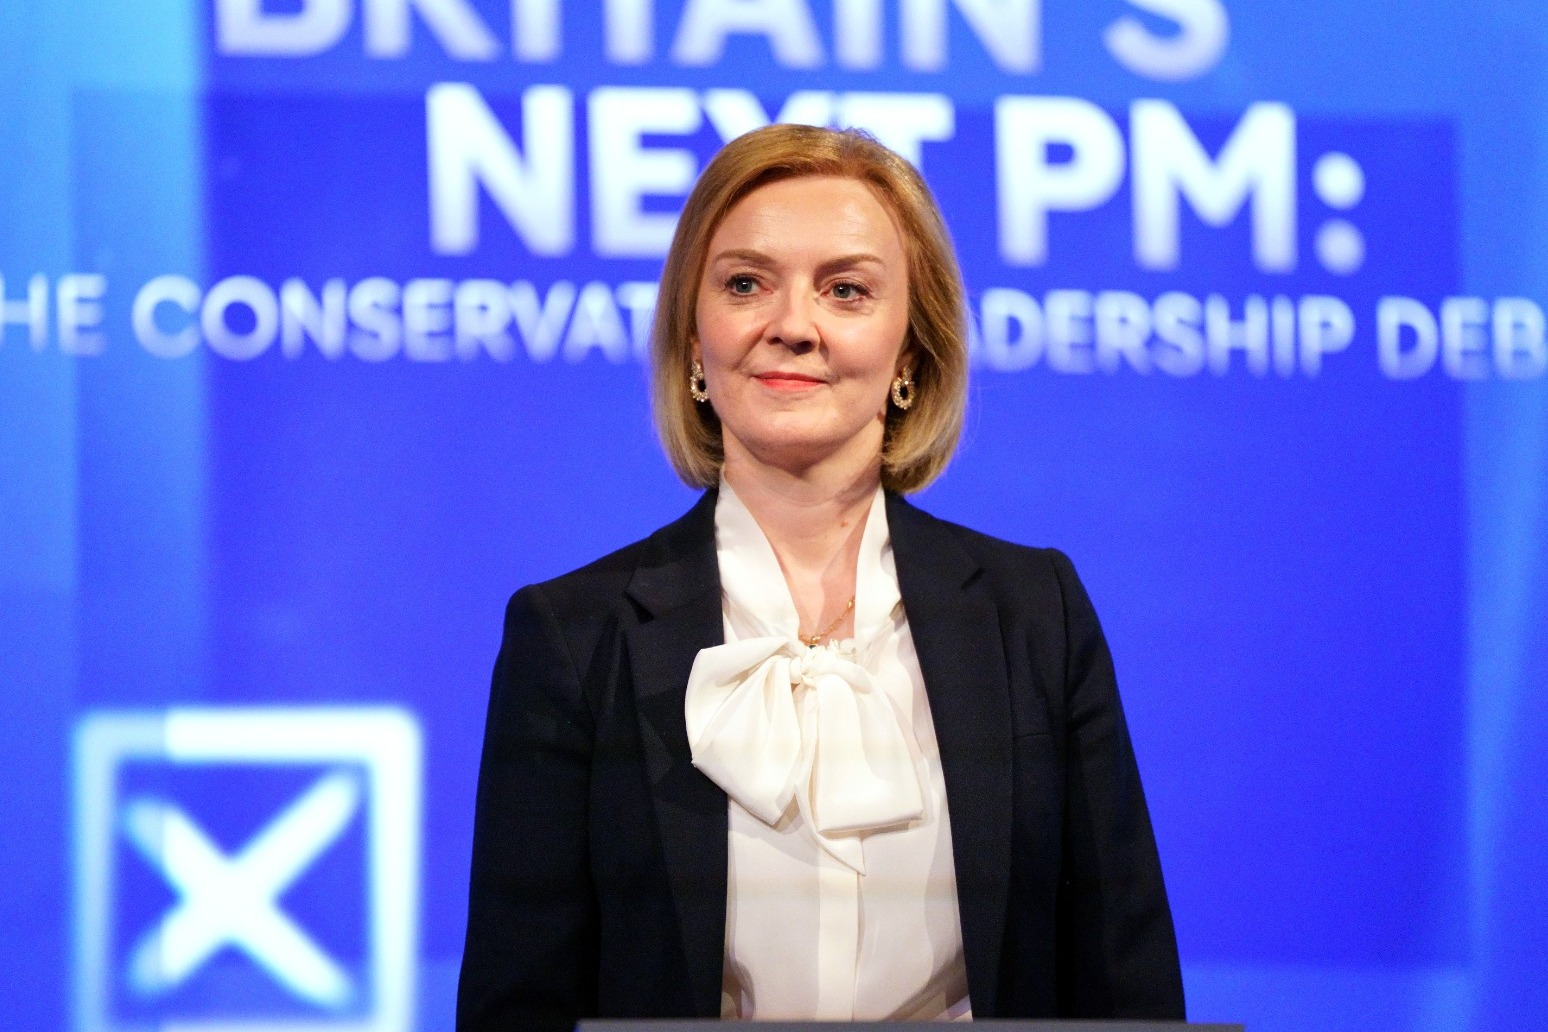 Liz Truss I am only the person who can deliver change in line with Tory values